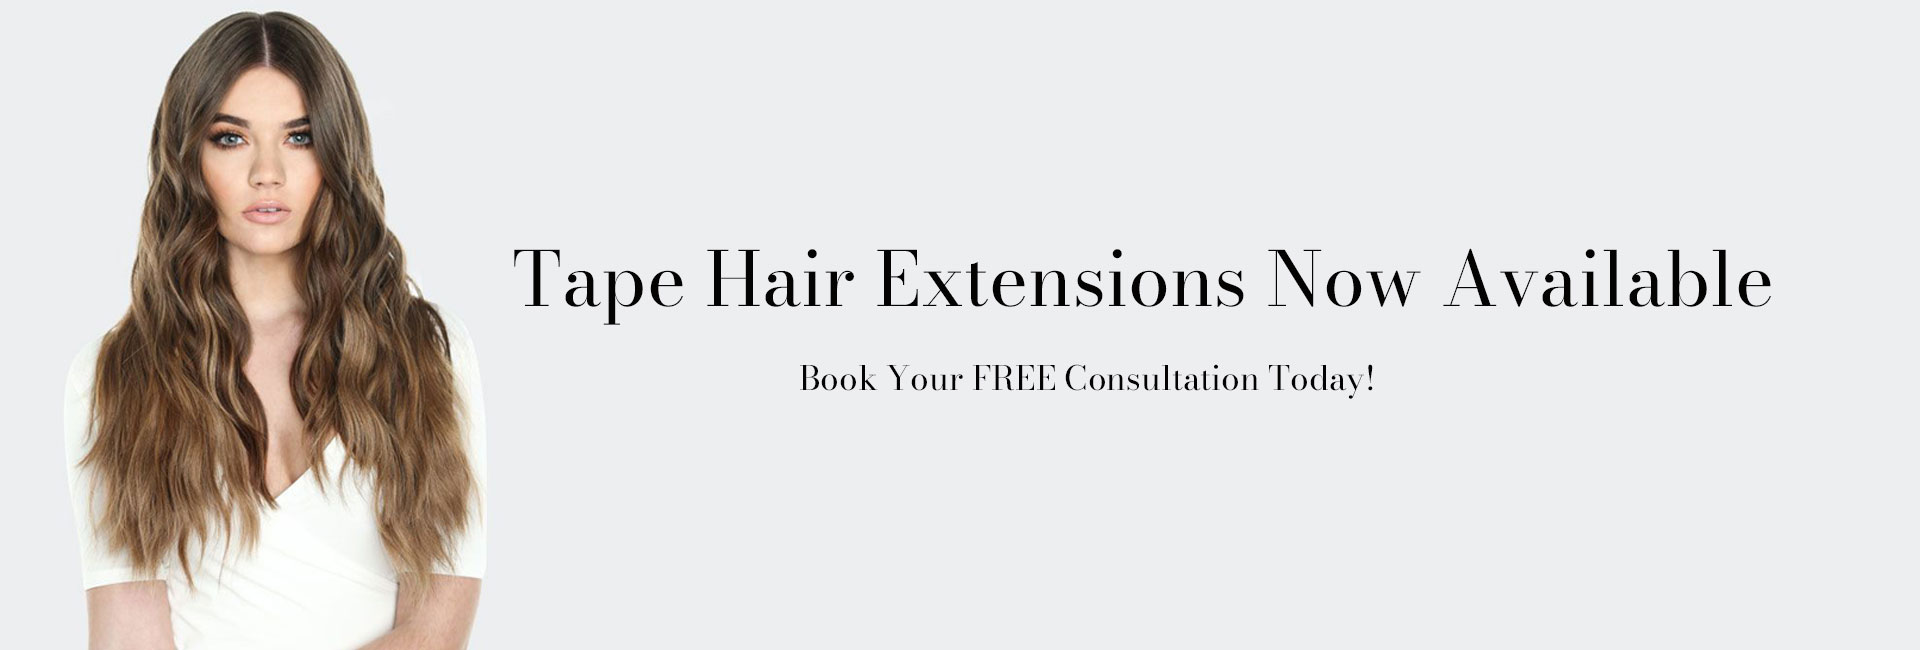 Tape Hair Extensions at The Best Salons in Bermondsey & Streatham, Image London